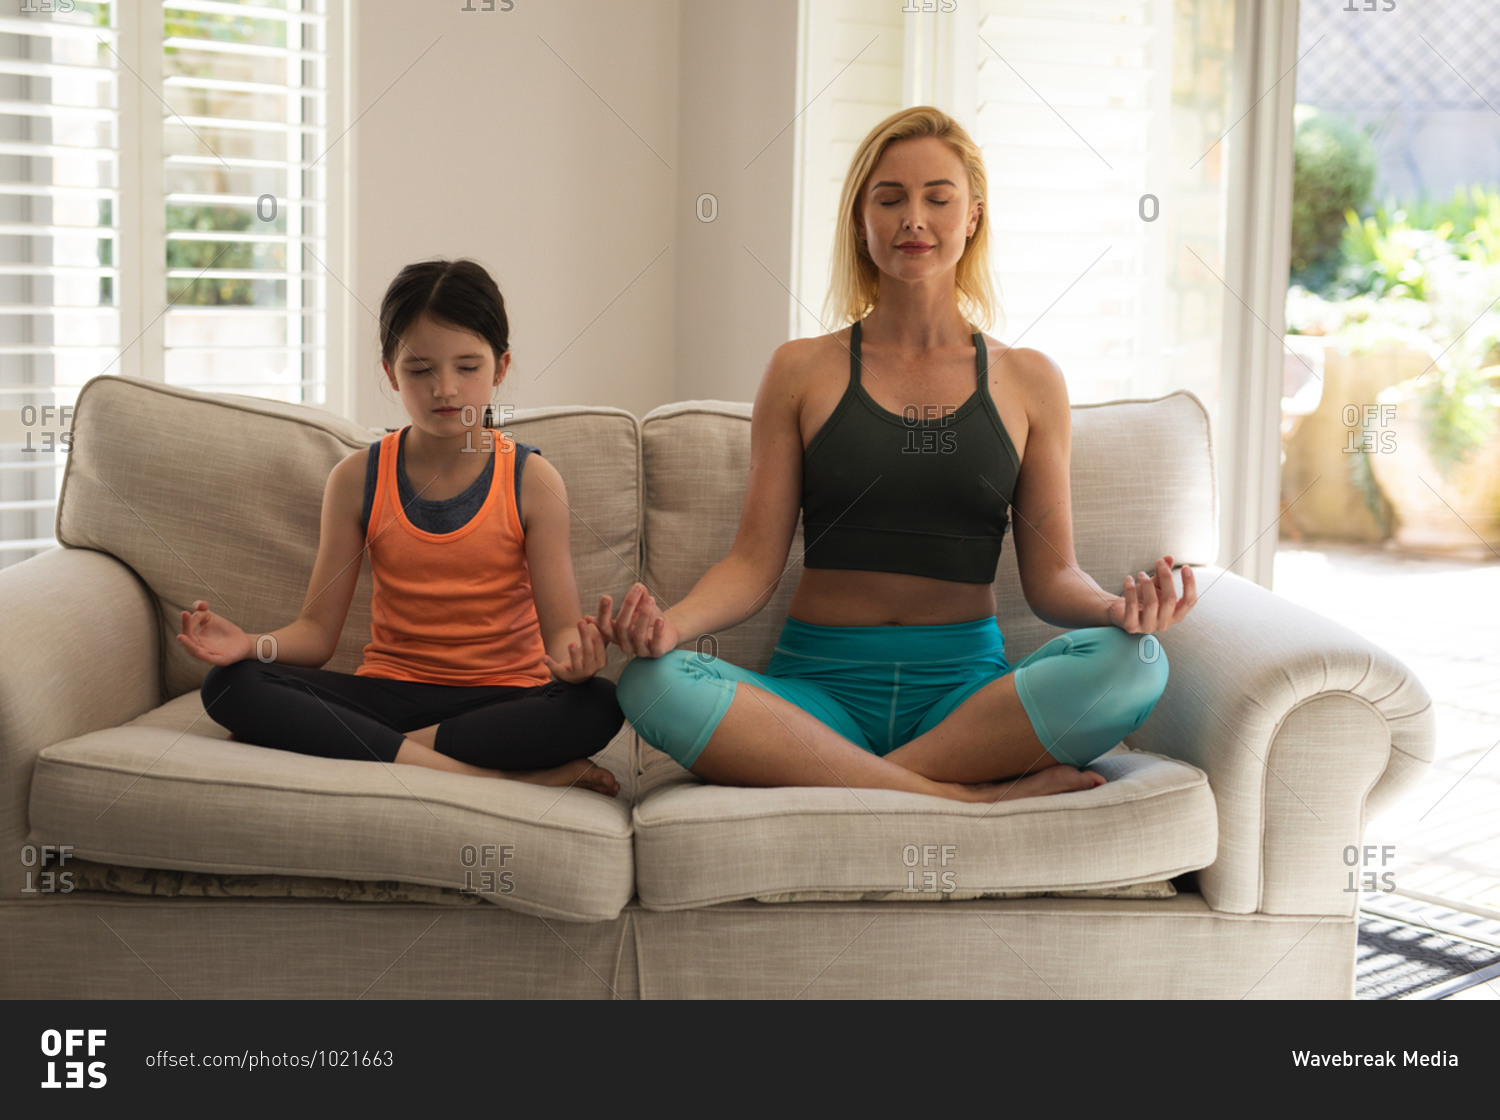 Caucasian woman and her daughter spending time at home together, doing yoga, meditating. Social distancing during Covid 19 Coronavirus quarantine lockdown.